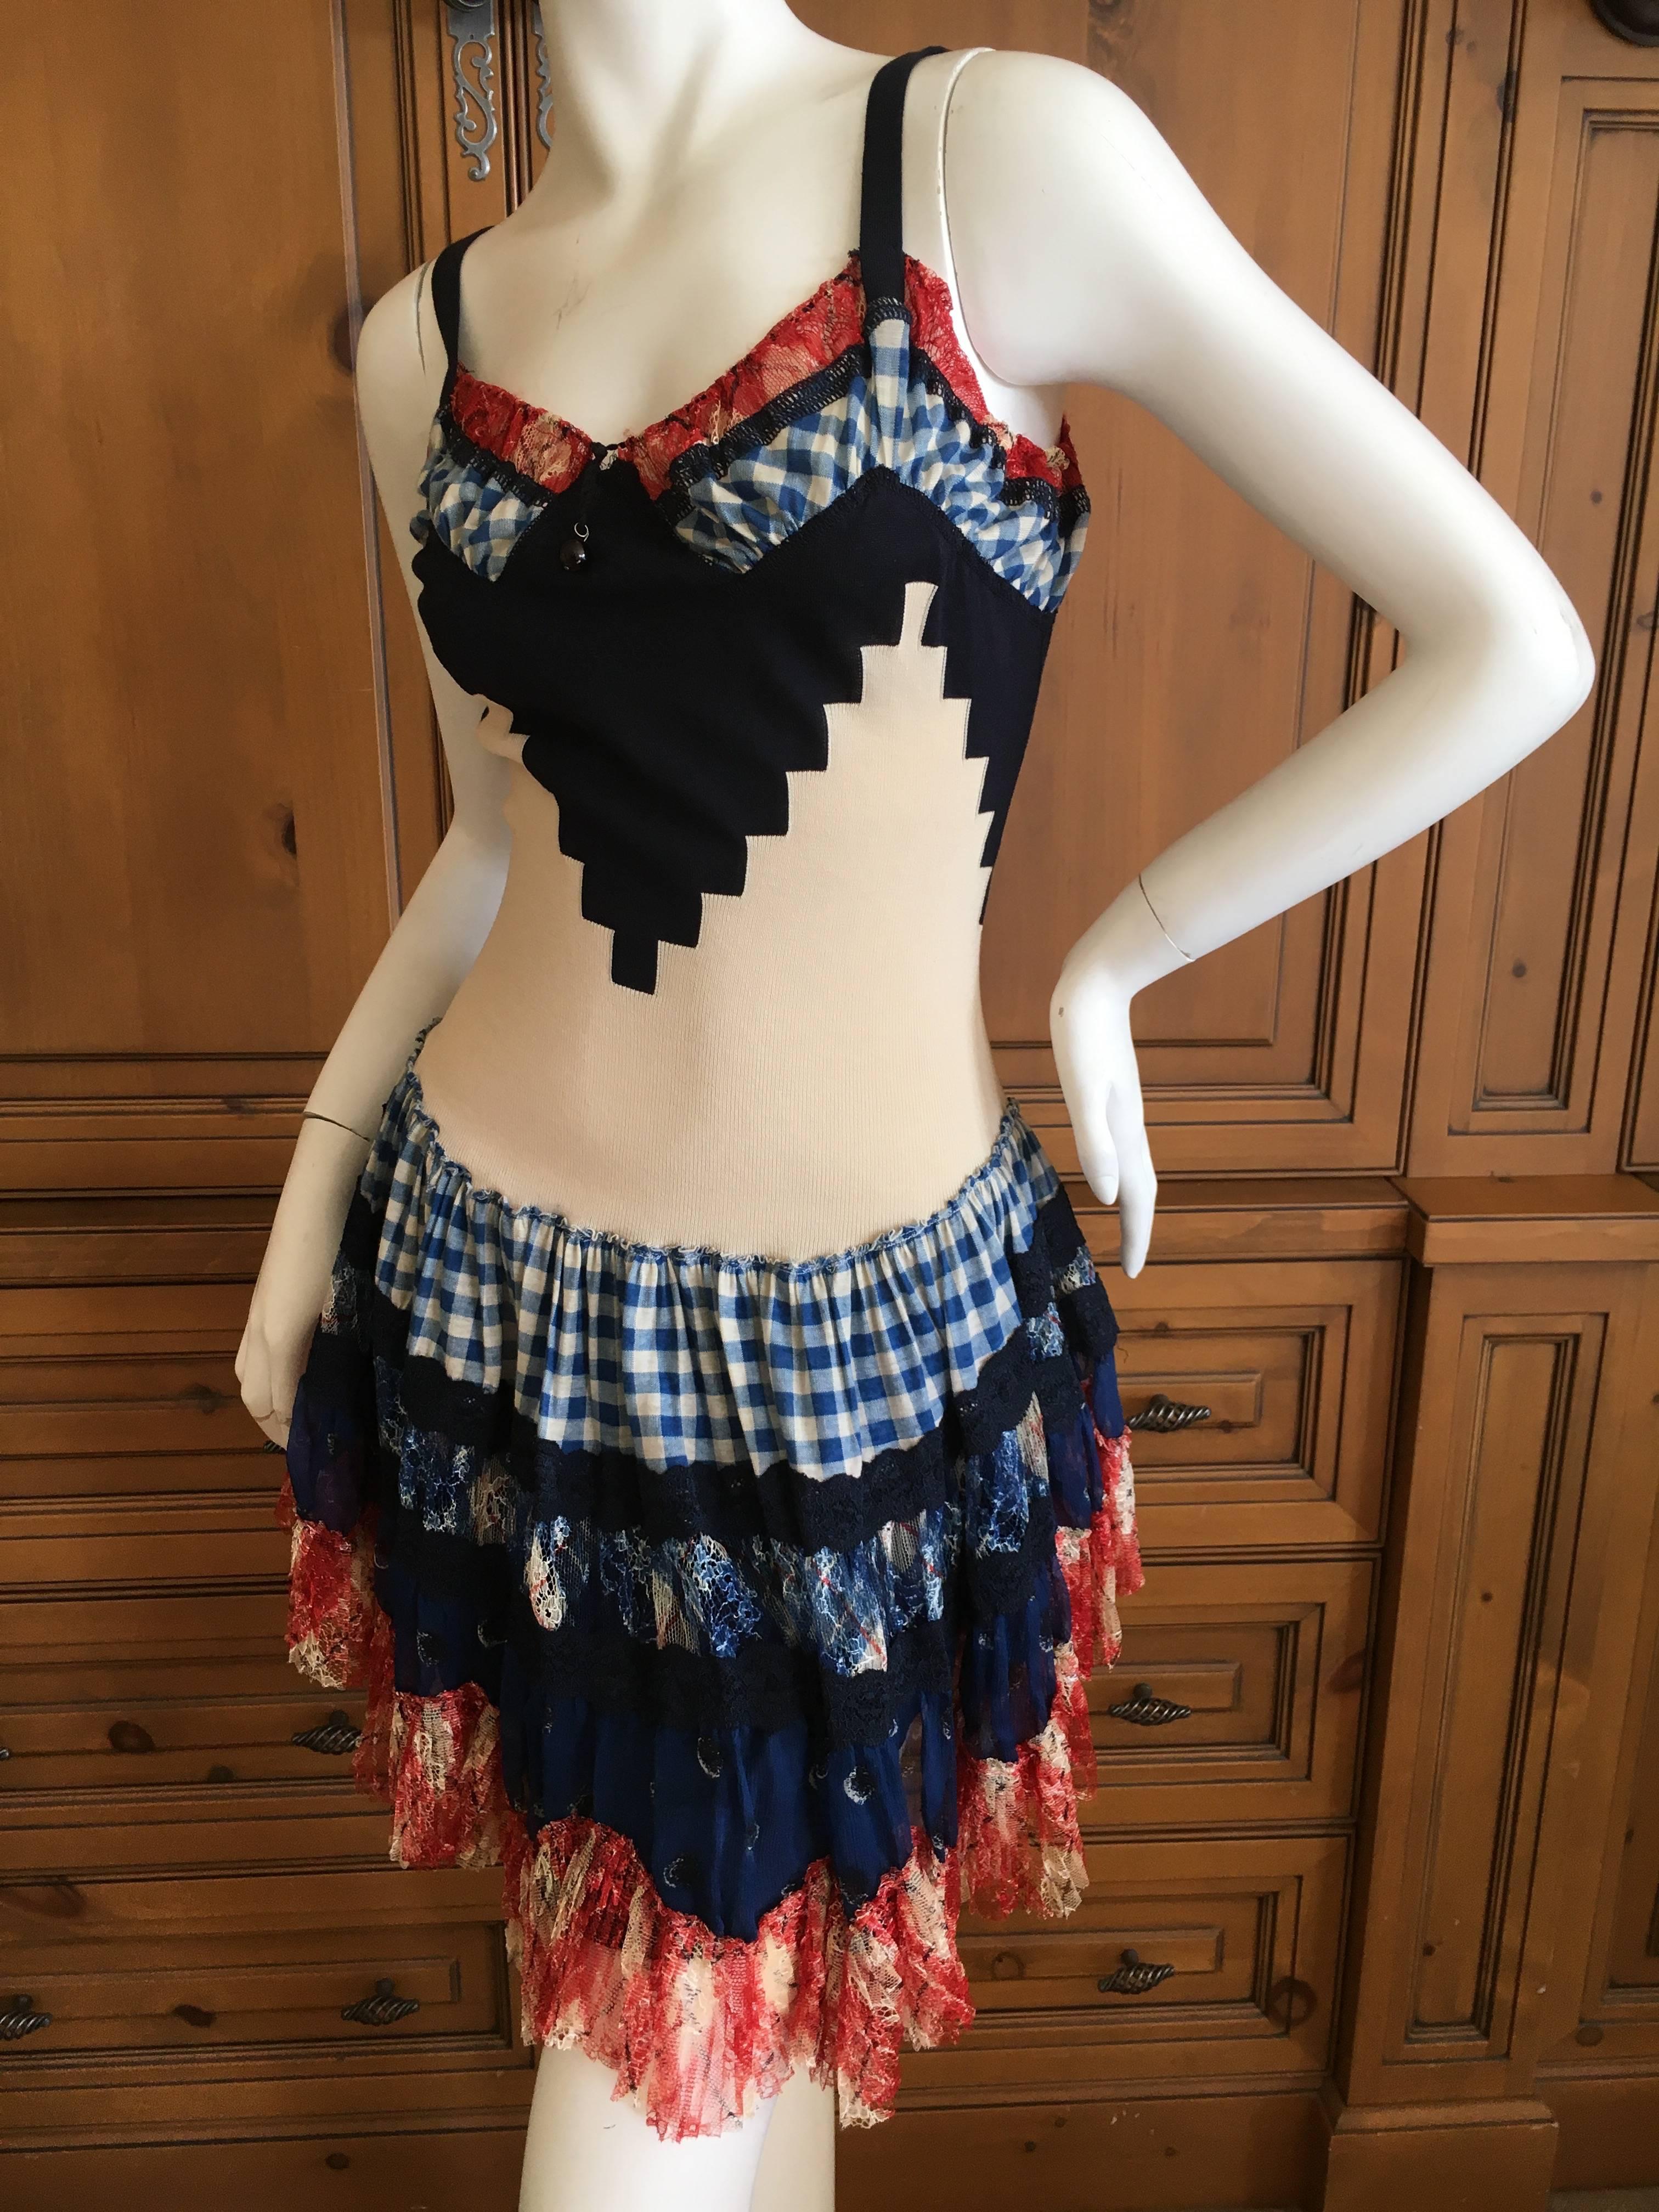 Jean Paul Gaultier Maille Femme Vintage Gingham Pattern Play Dress In Excellent Condition For Sale In Cloverdale, CA